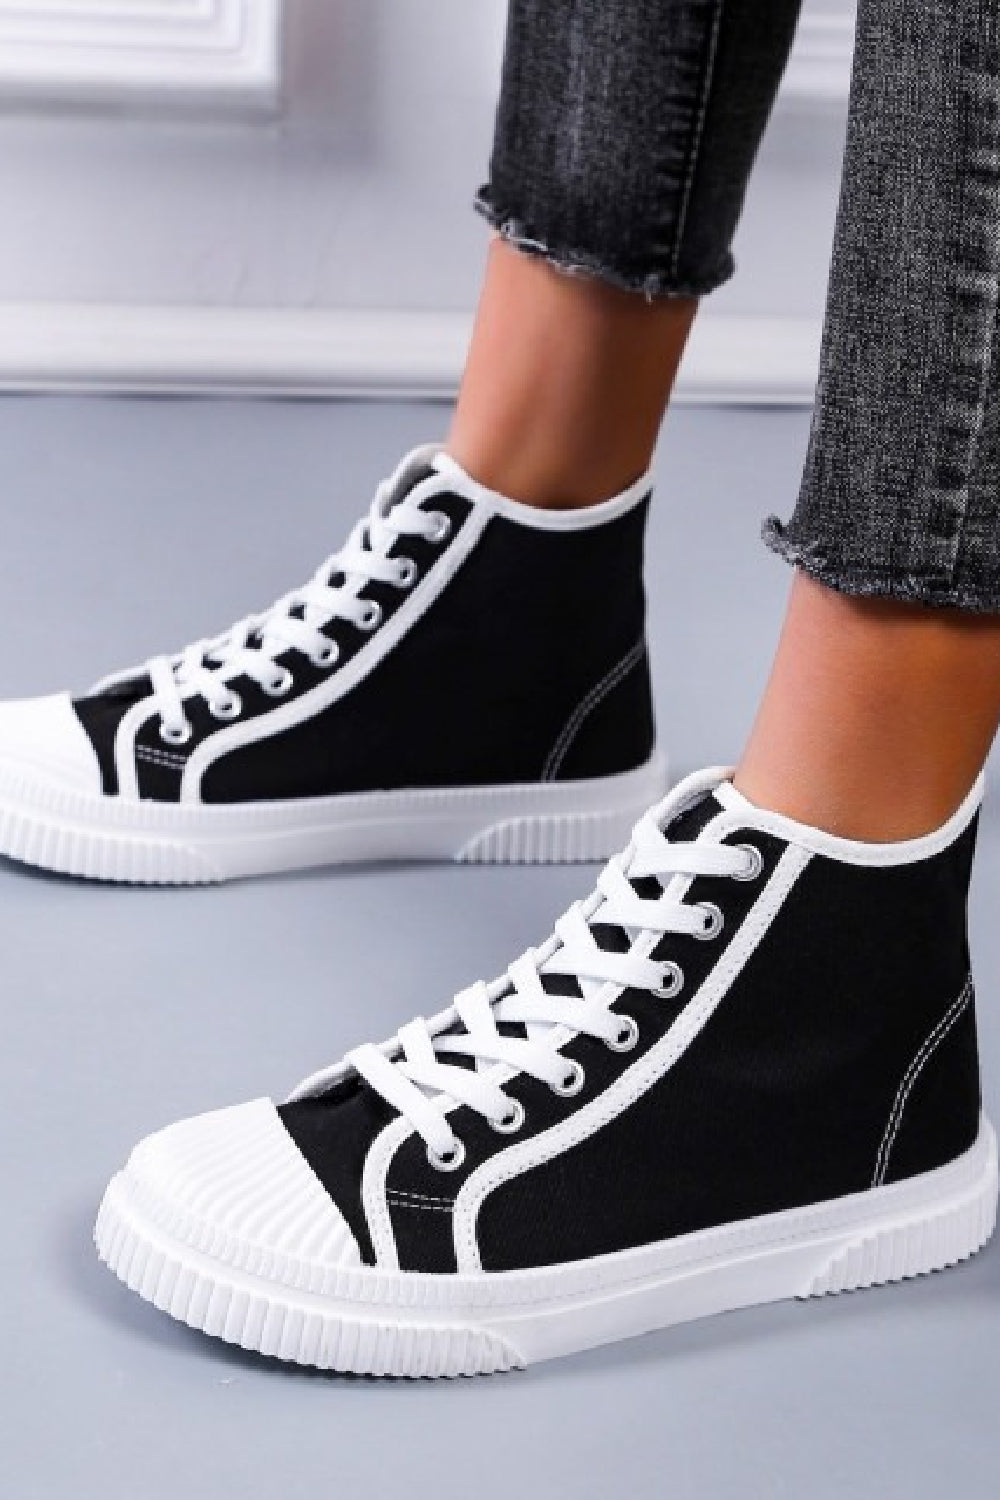 BLACK LACE UP FLAT HIGH TOP TRAINERS